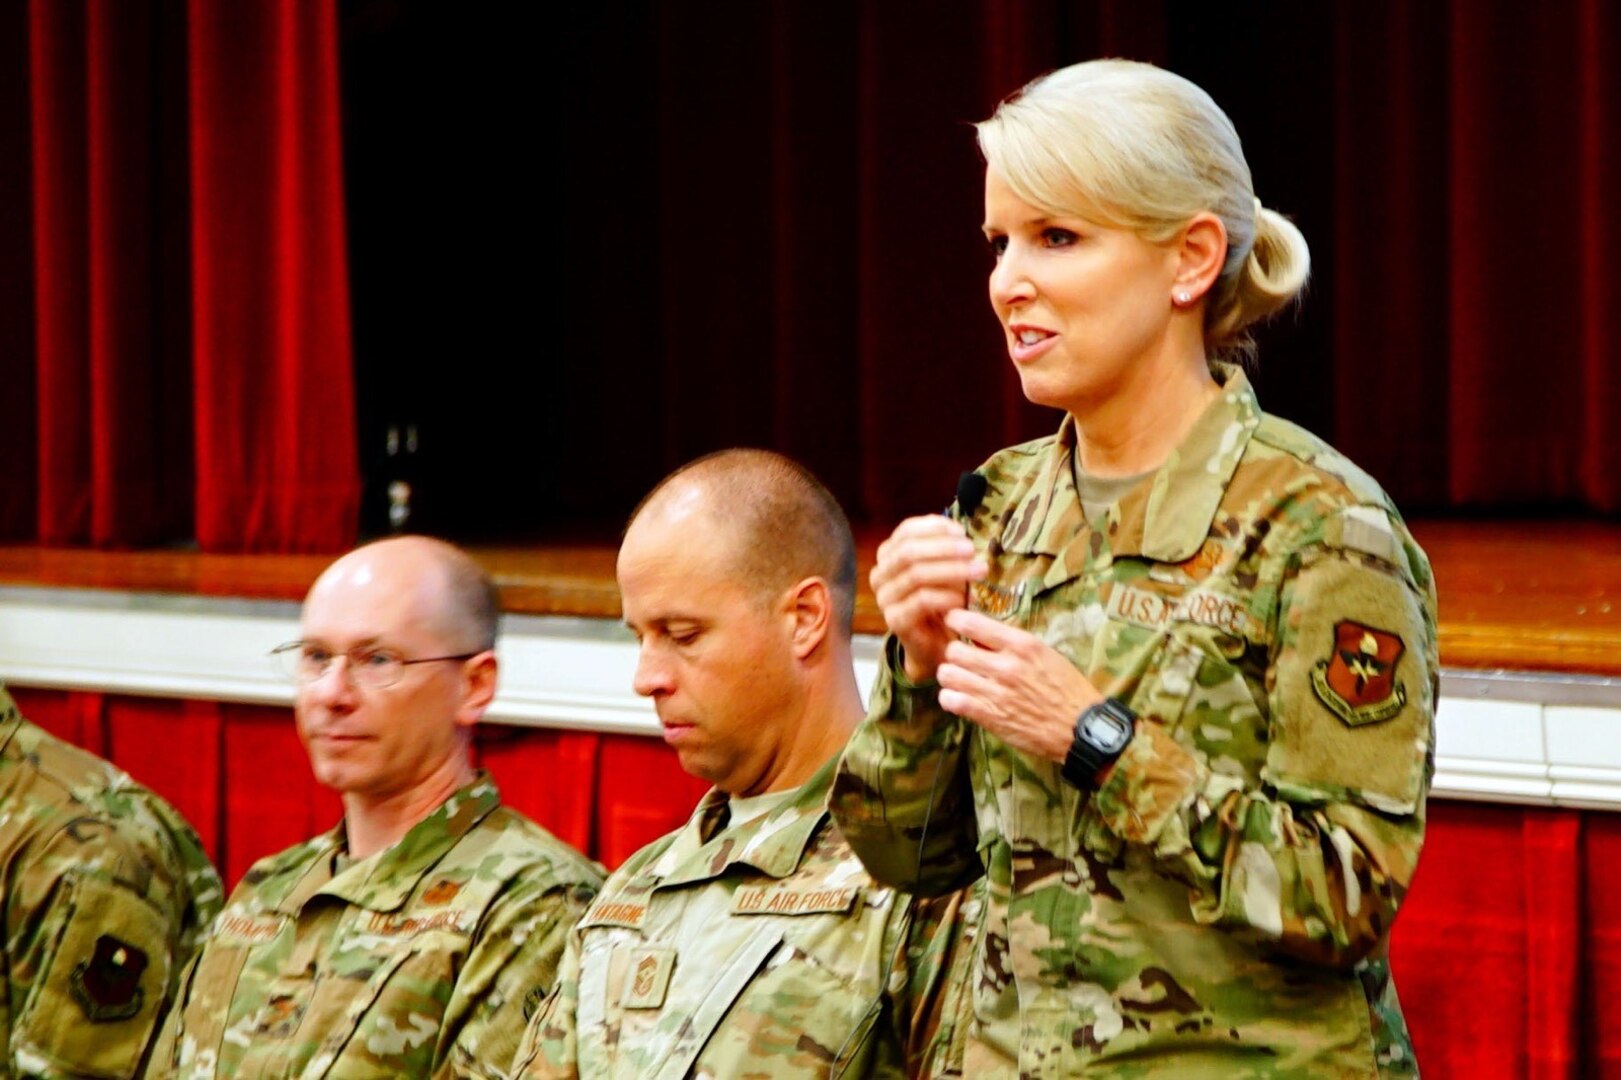 Brig. Gen. Laura Lenderman, 502d Air Base Wing and Joint Base San Antonio commander, and her leadership team, host a housing town hall Dec. 12, 2019 at the Fleenor Auditorium, JBSA-Randolph. These town halls here implemented to listen to concerns and update residents on the ongoing measures being taken to ensure safe and healthy homes at JBSA.